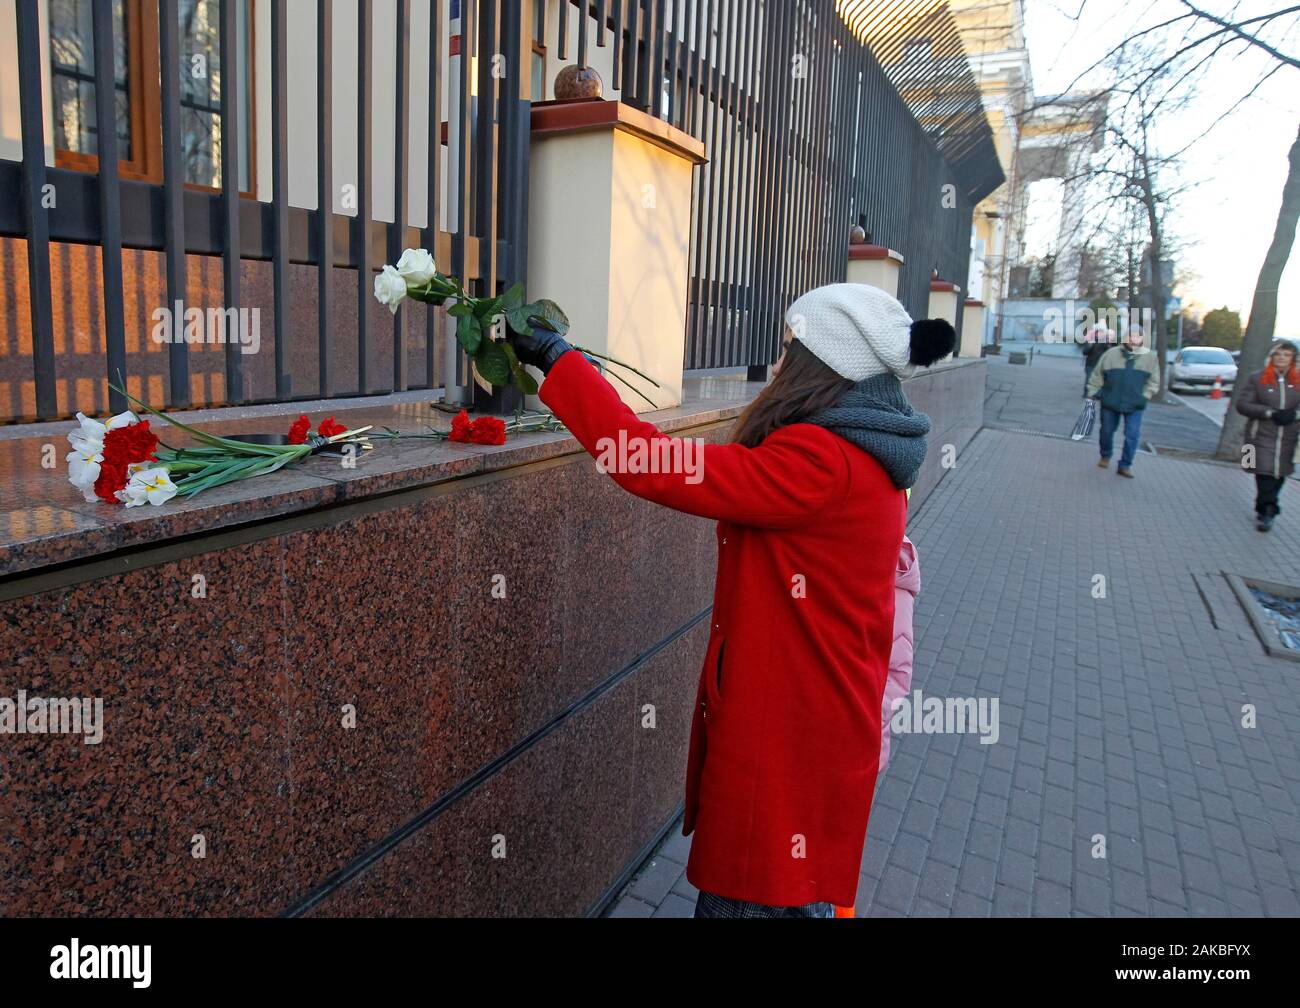 A Woman lays flowers in memory of victims of the Boeing 737 crash in Iran close to the Embassy of Canada. Ukrainian Boeing 737 crashed after taking off from Tehran's airport on 8 January 2020, as media reported. Stock Photo